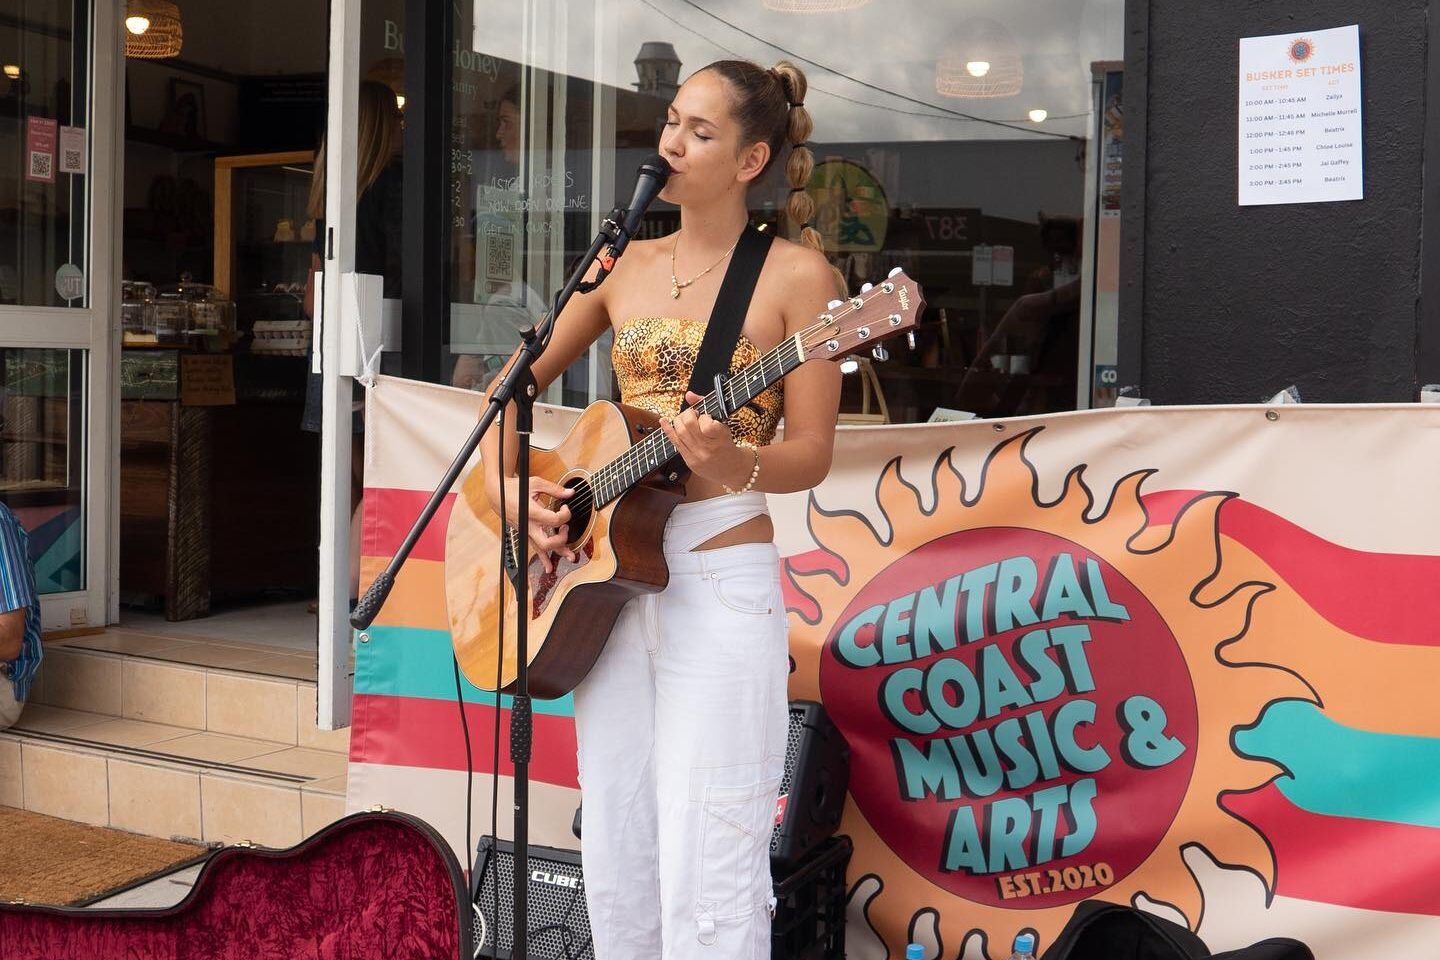 Busking at Long Jetty festival